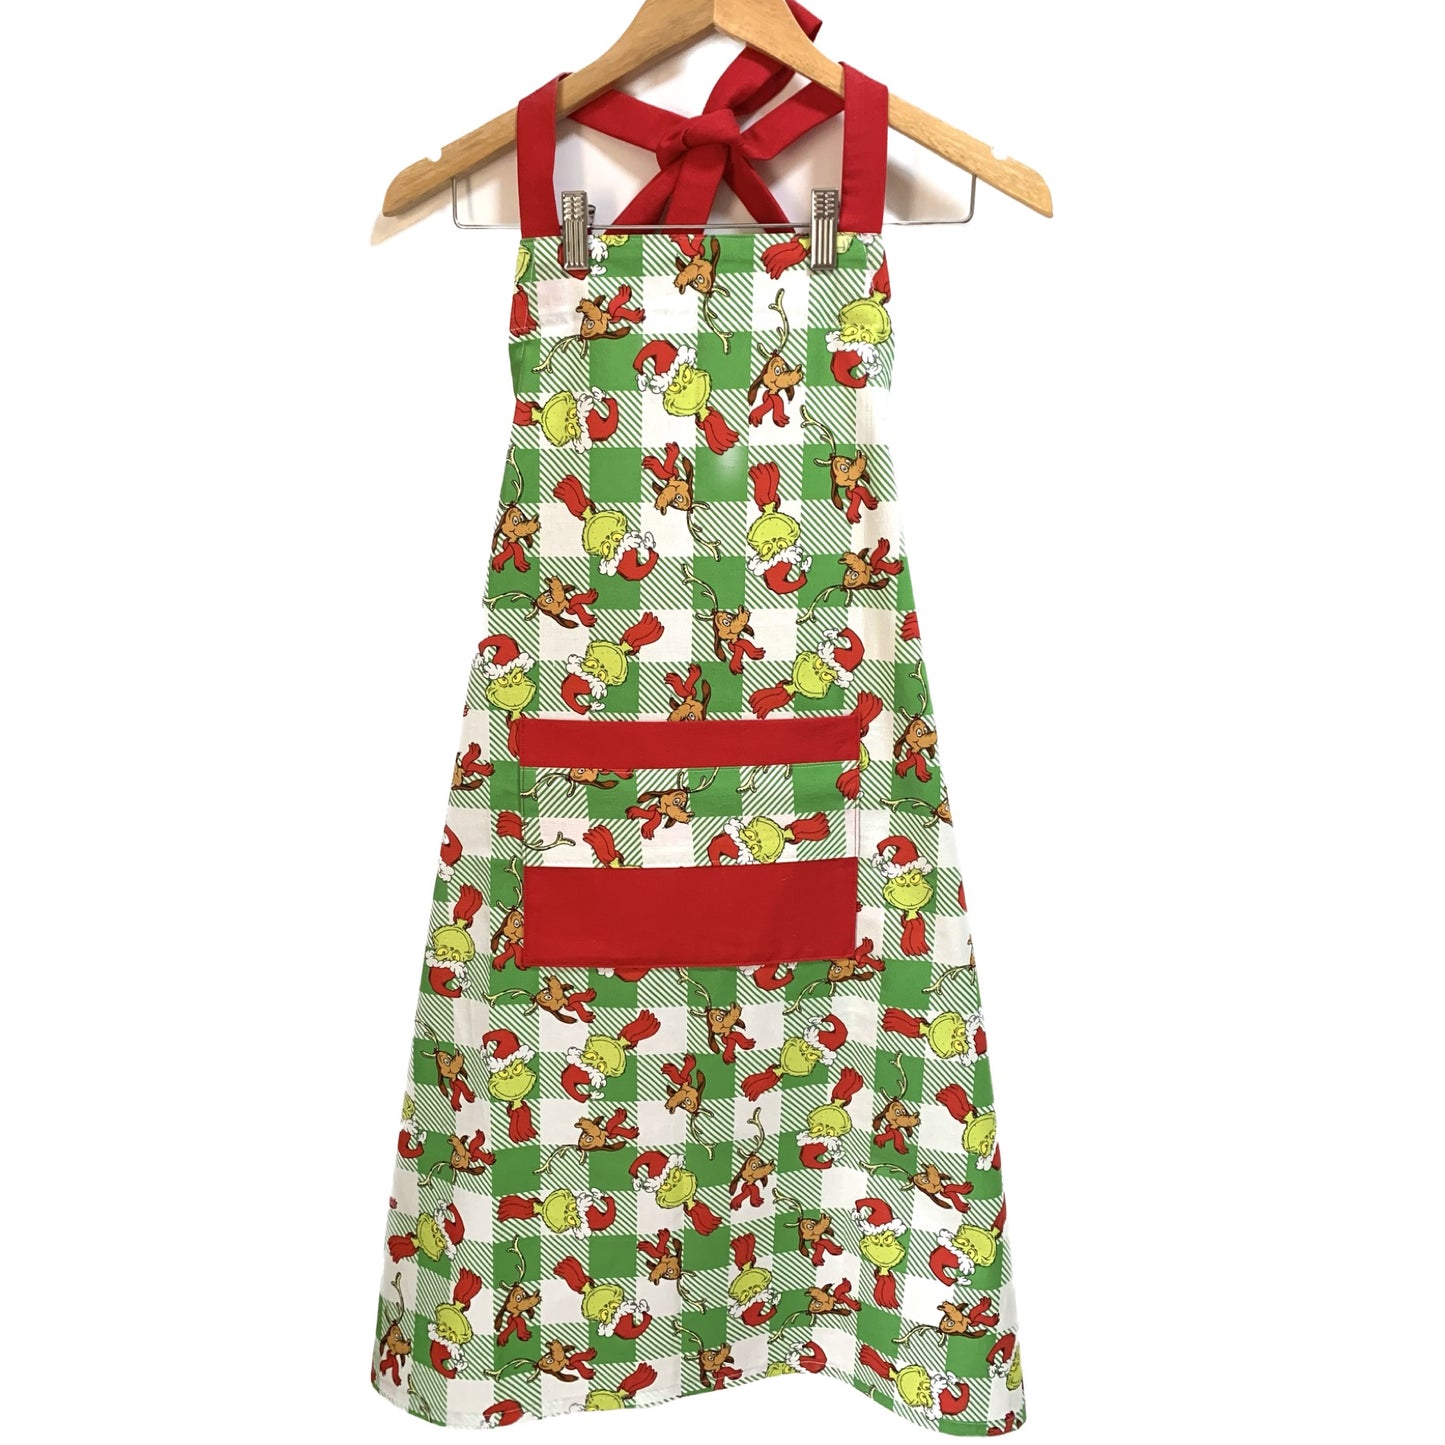 MAKIN' WHOOPEE - "THE GRINCH- Checked" CHRISTMAS APRON